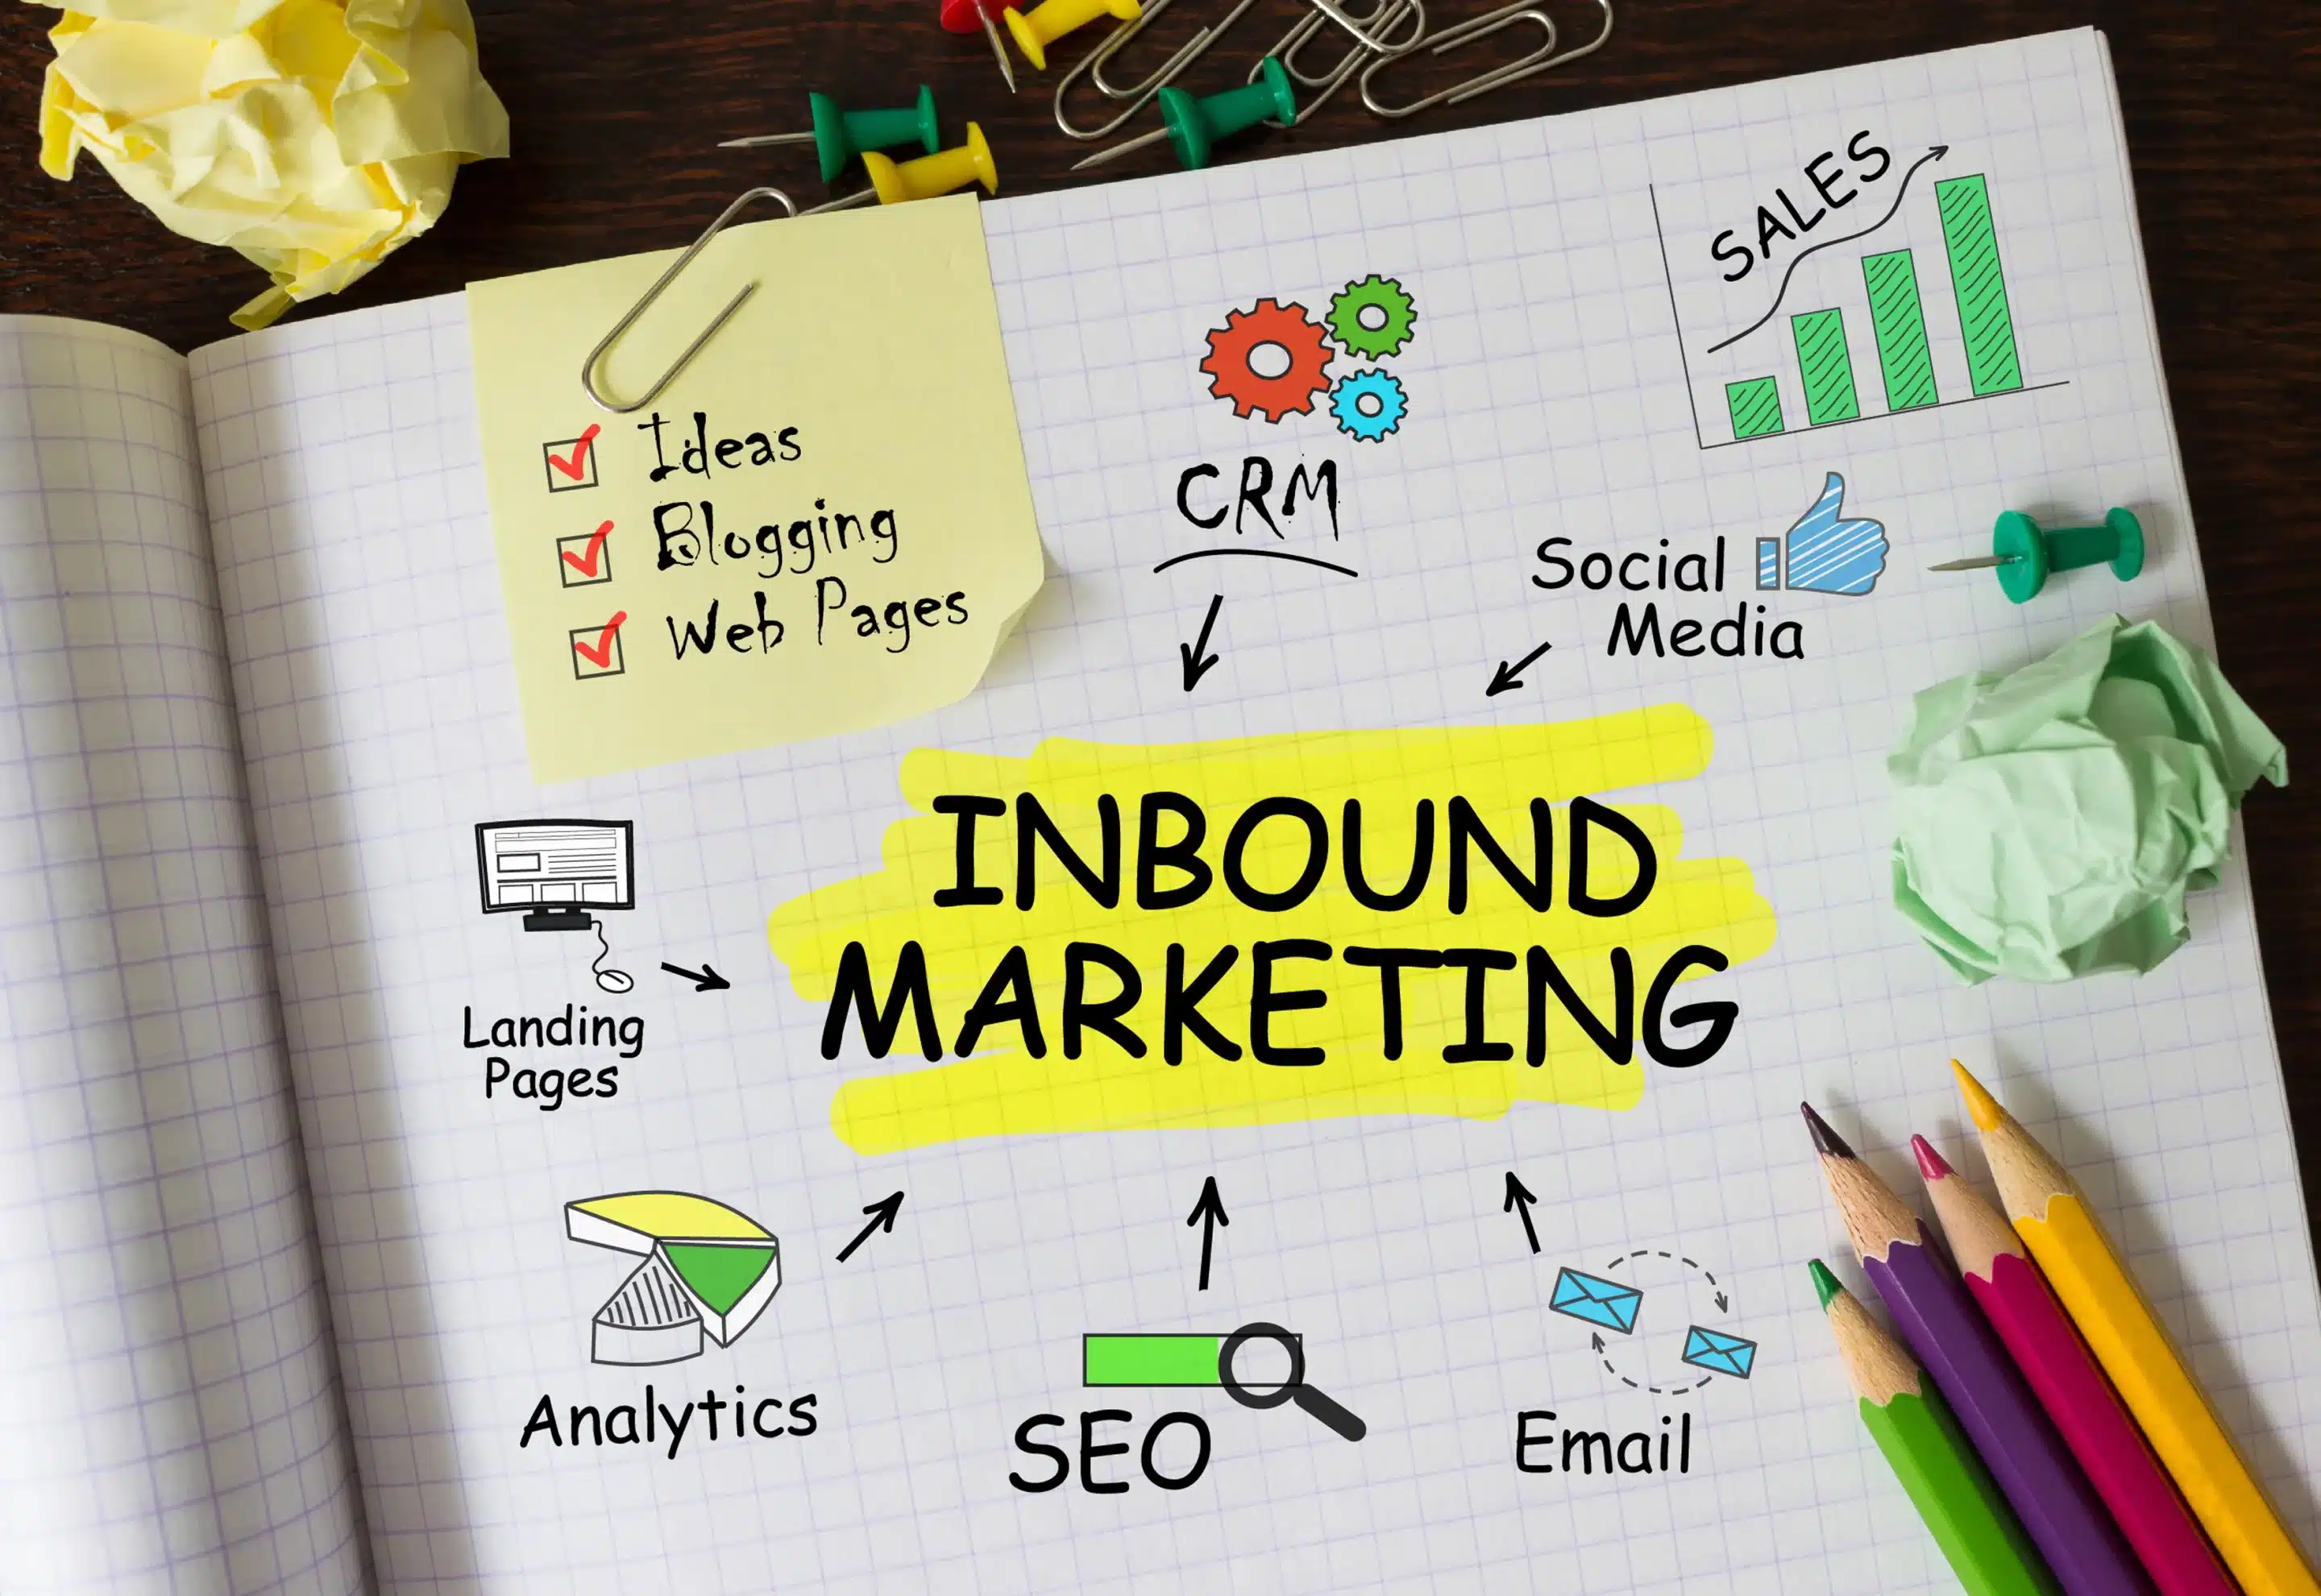 Increase Business Growth: Inbound Marketing Tactics for SMEs